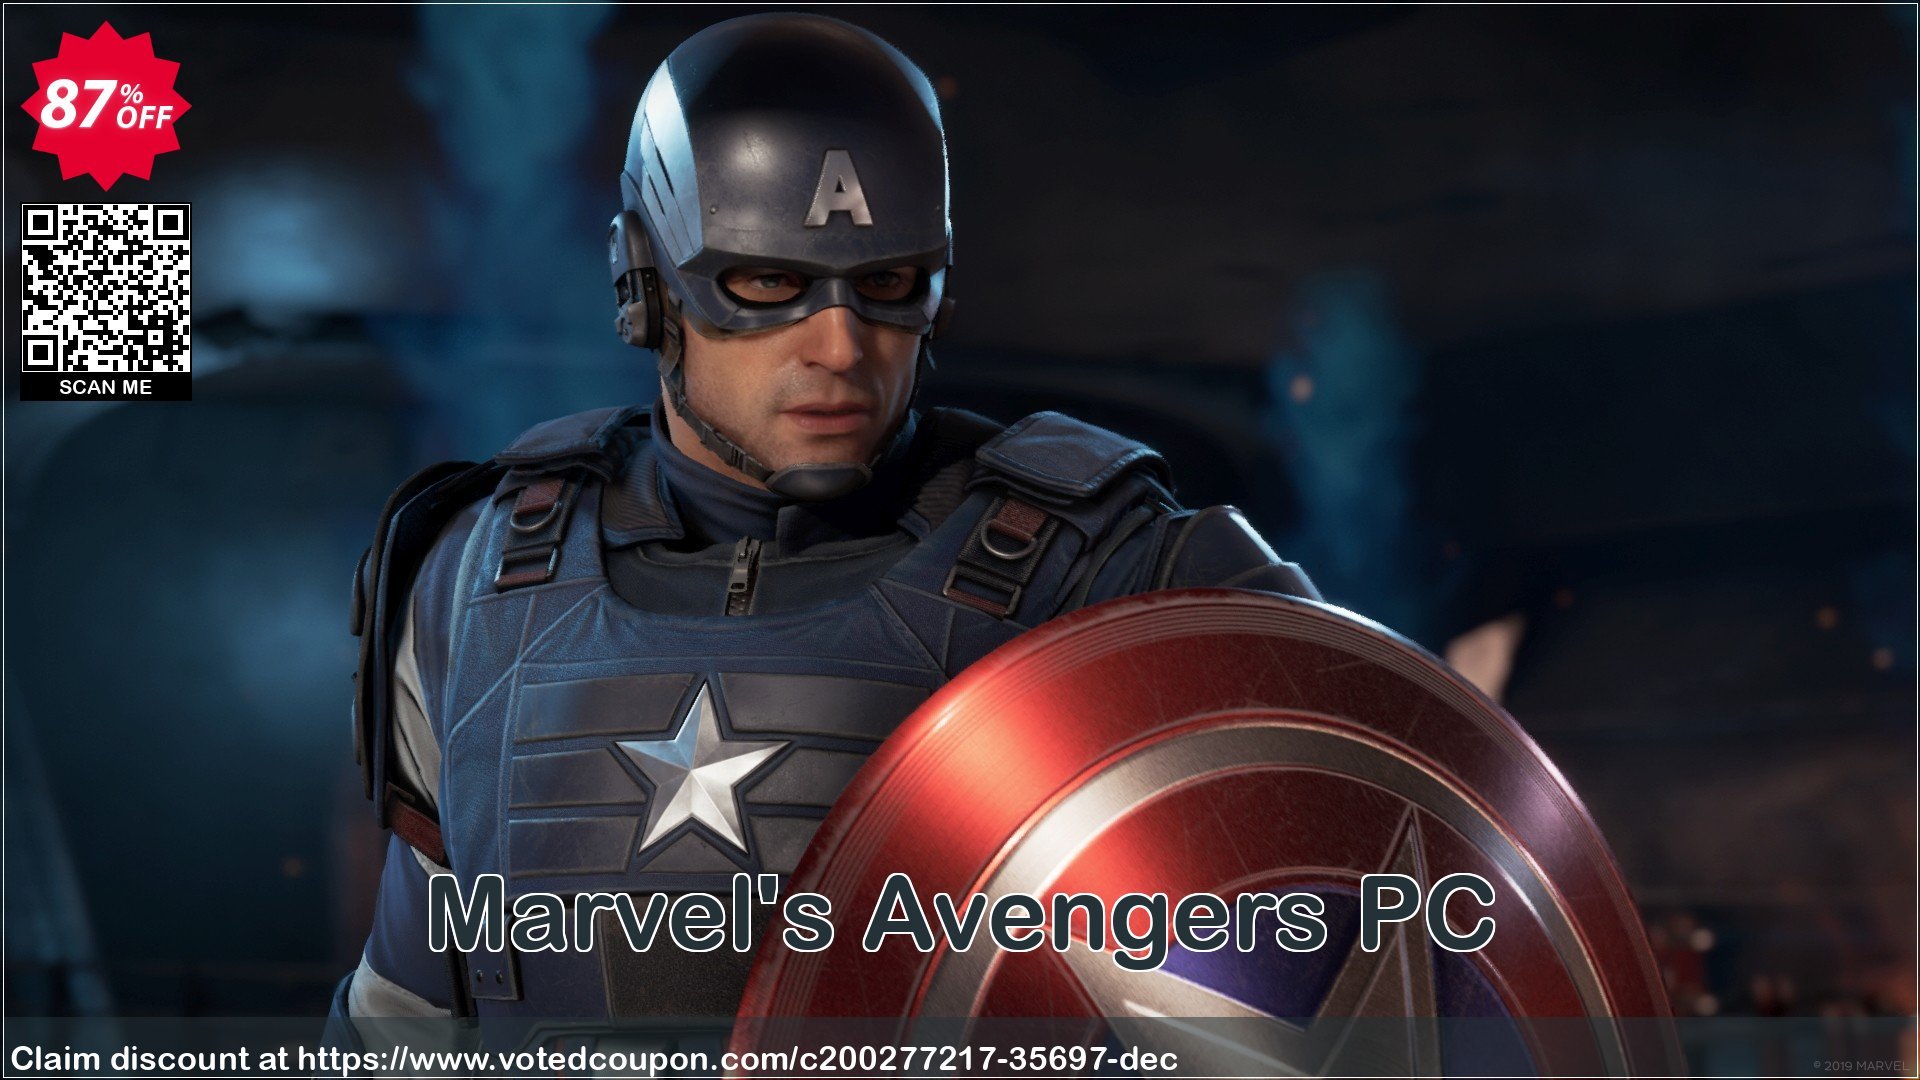 Marvel's Avengers PC Coupon Code Apr 2024, 87% OFF - VotedCoupon